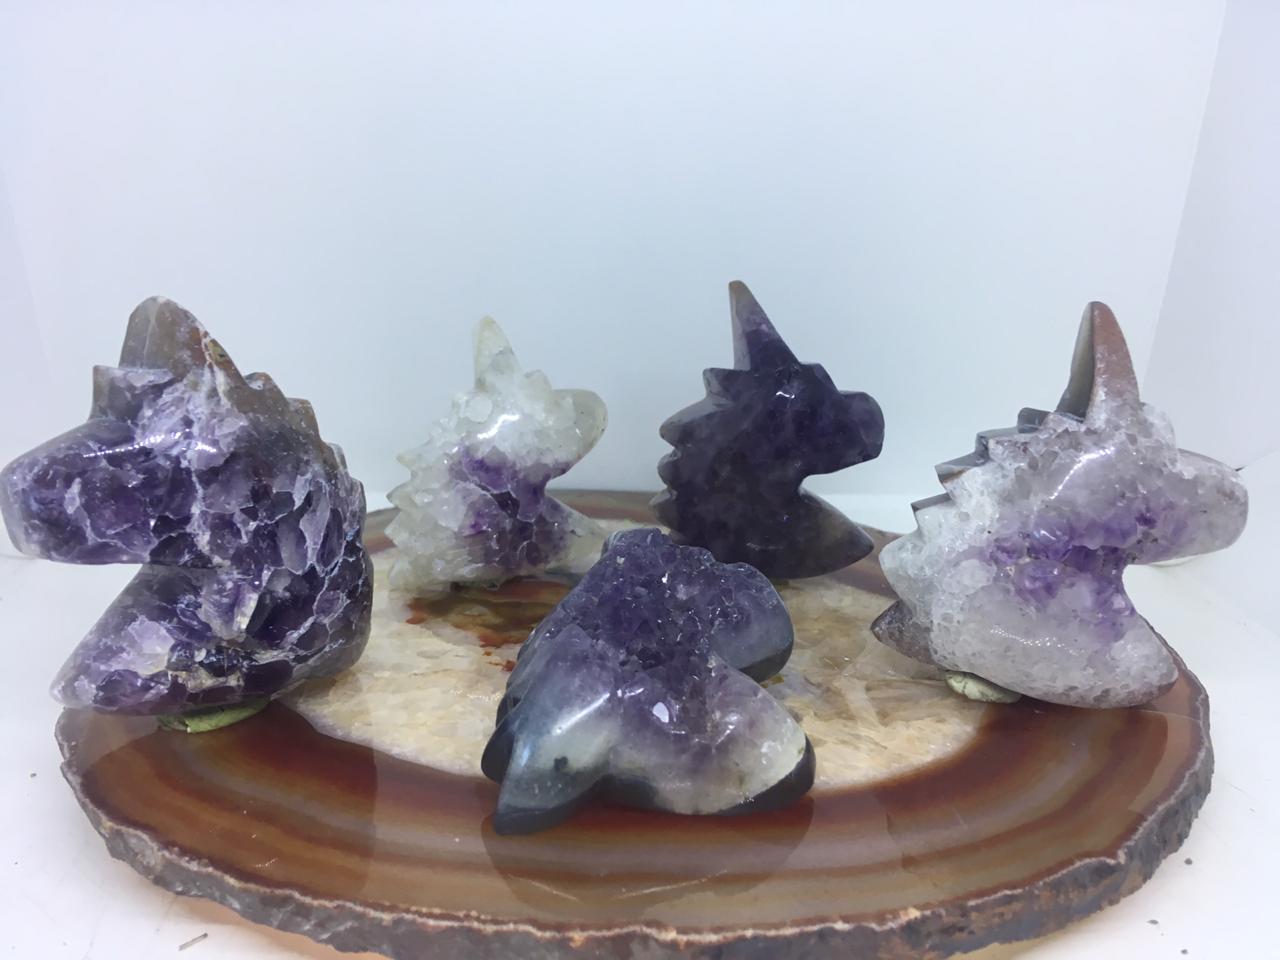 Stones from Uruguay - Amethyst Druzy Unicorn Cabochons with Convex Top.